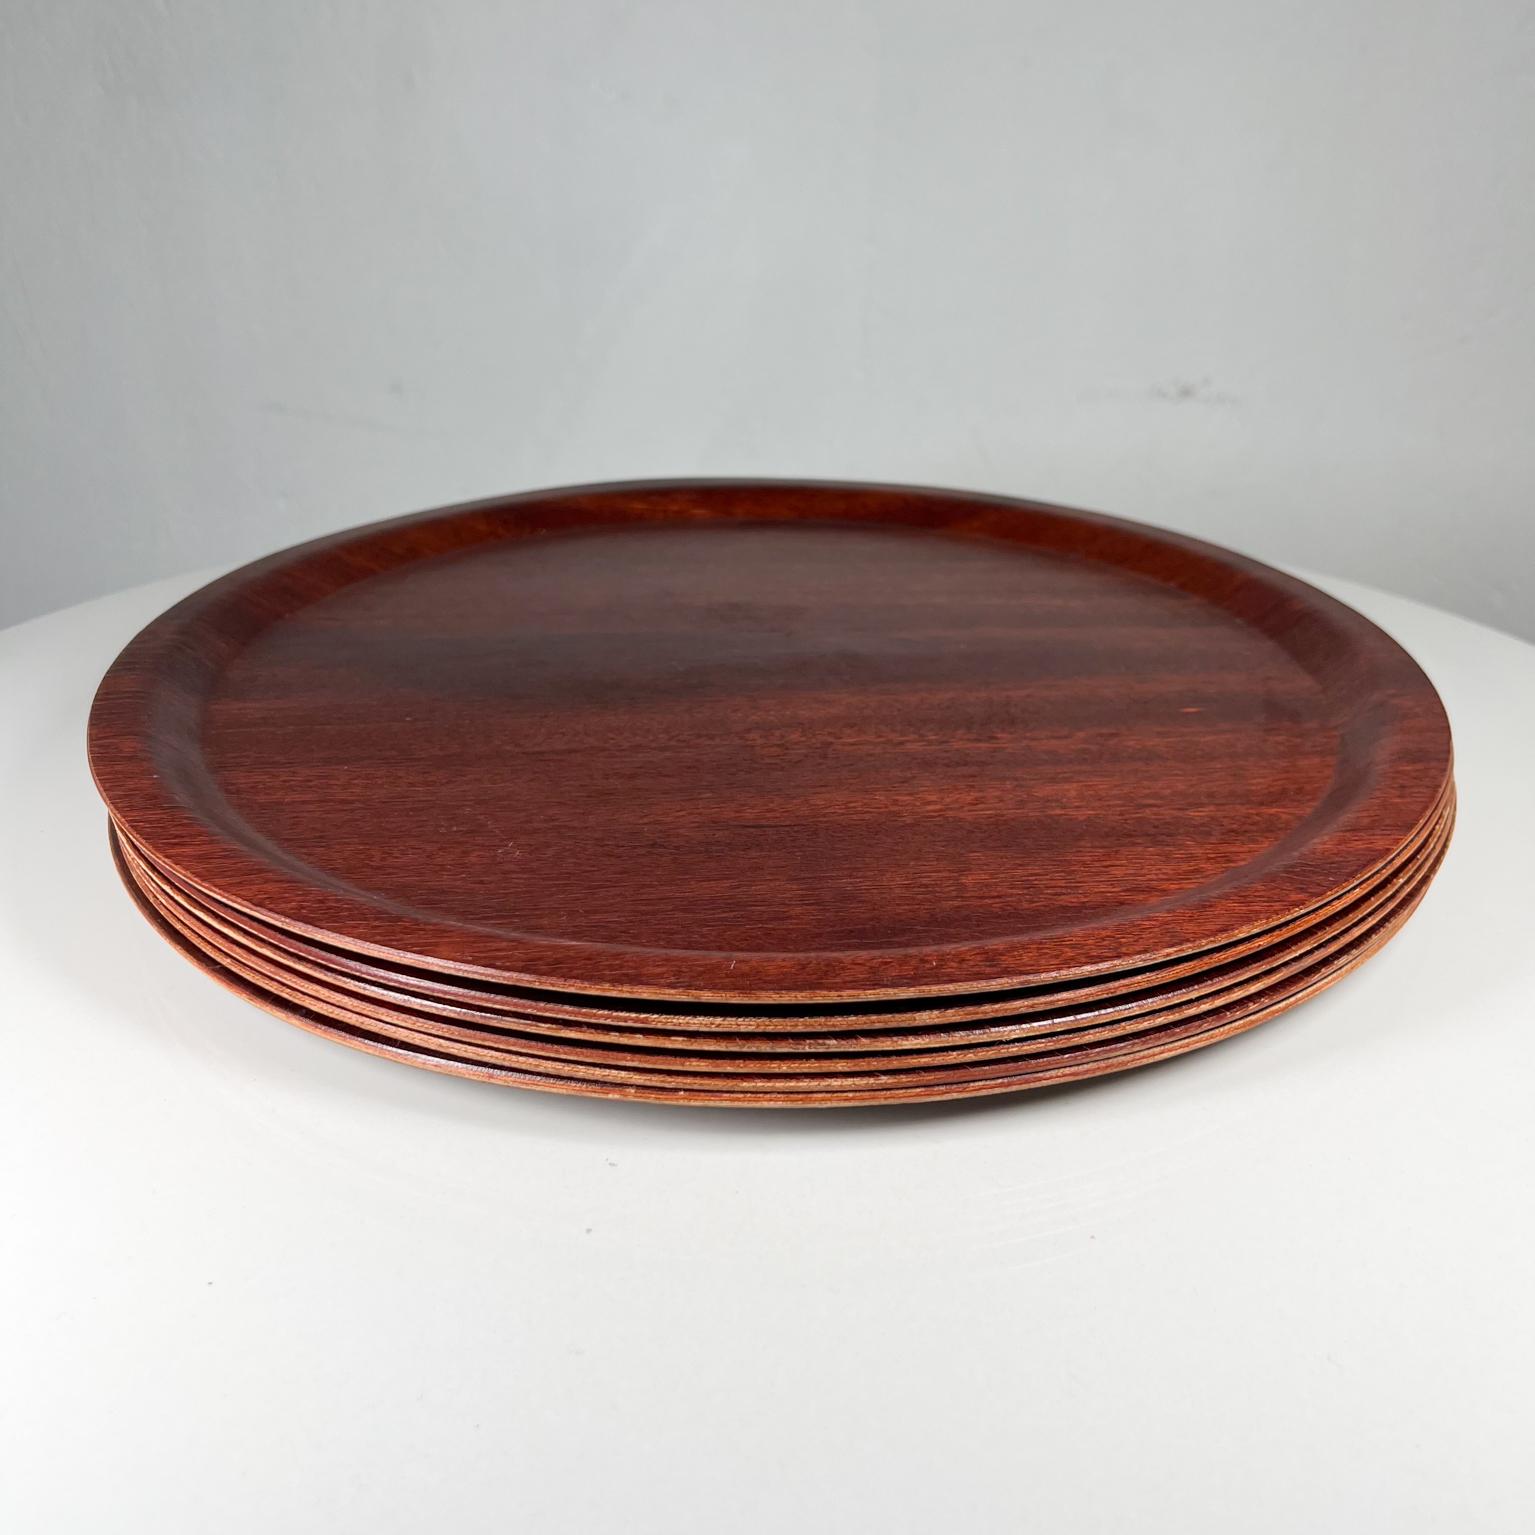 1960s modern set of six round serving plates bent plywood
14.38 diameter x .5
Preowned original vintage condition.
See images listed please.